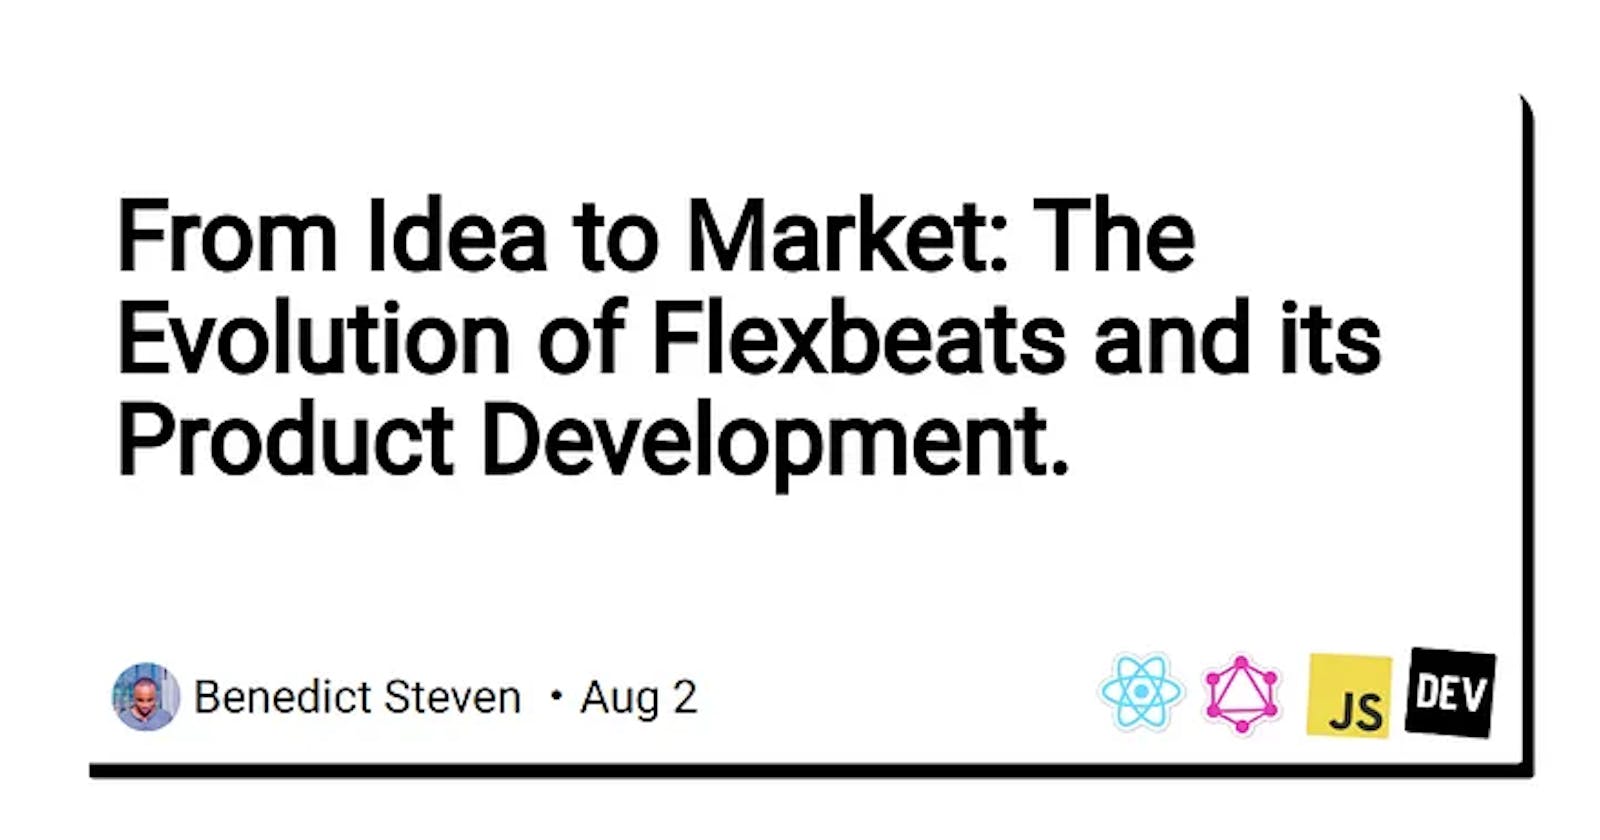 From Idea to Market: The Evolution of Flexbeats and its Product Development.